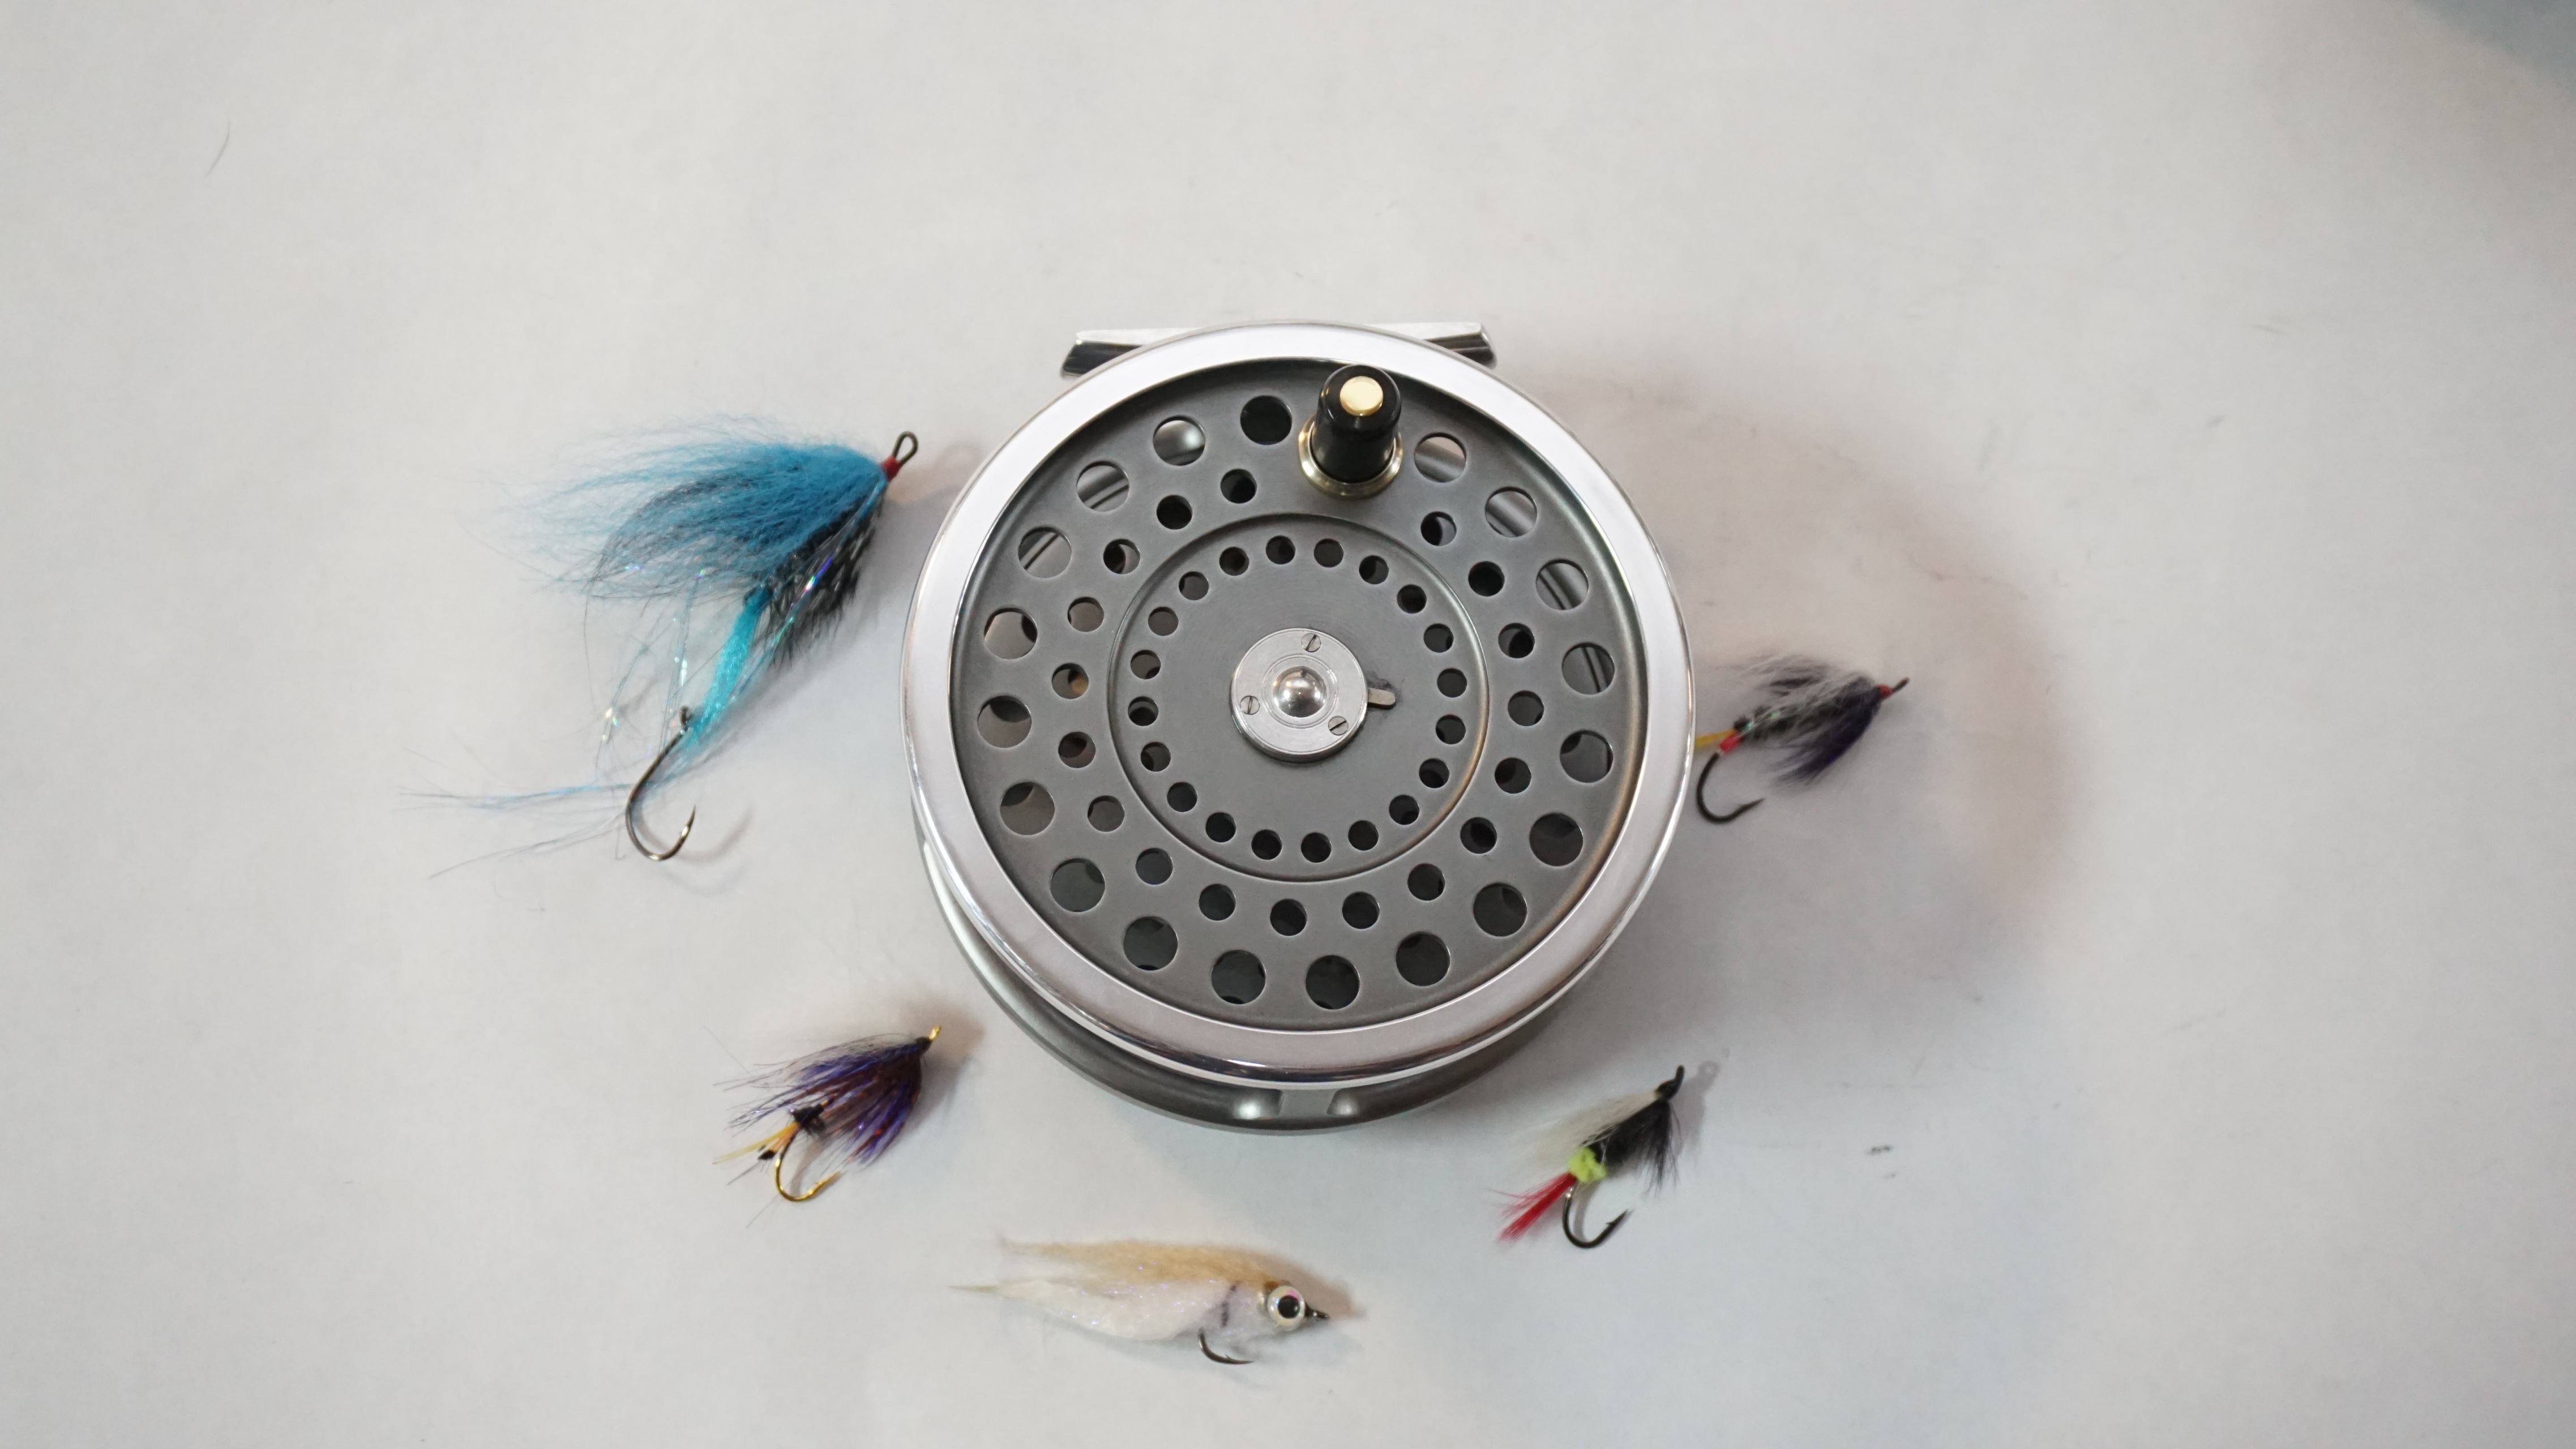 Hardy Marquis LWT